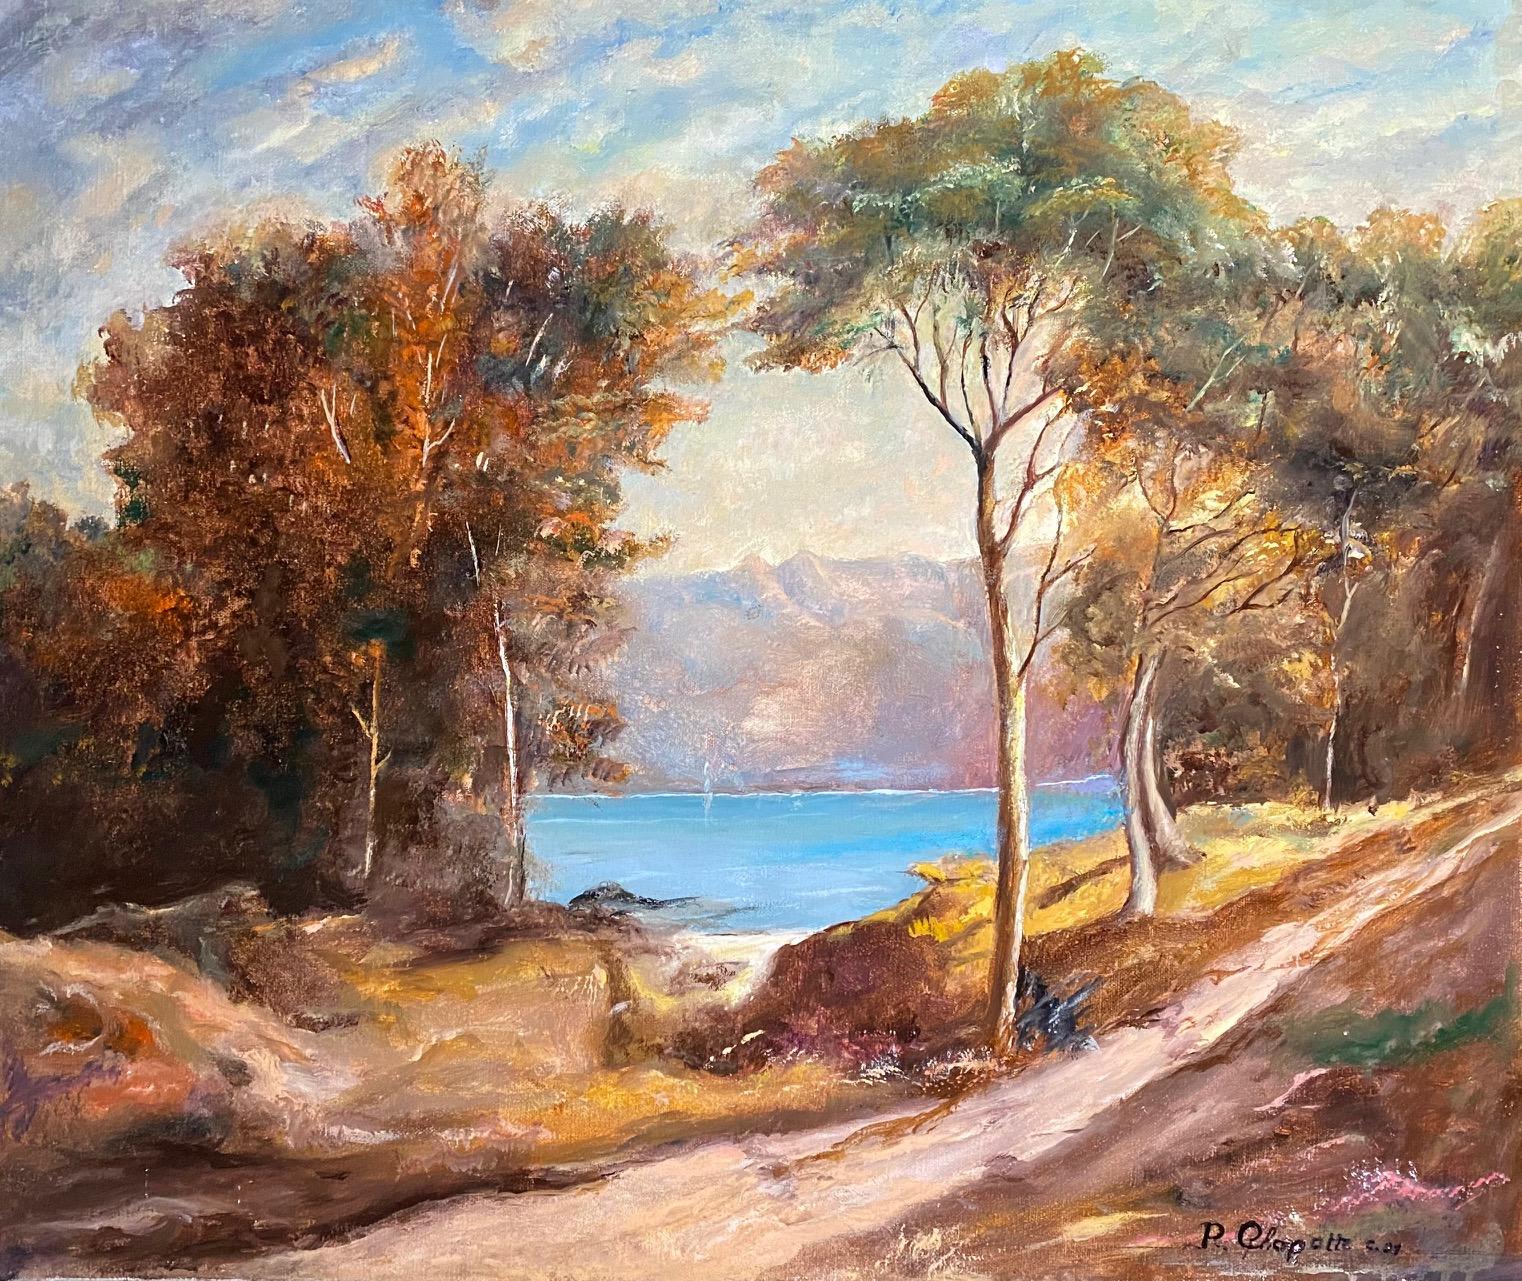 Unknown Landscape Painting - Lake and mountain landscape (1991) - Oil on canvas 44x52 cm